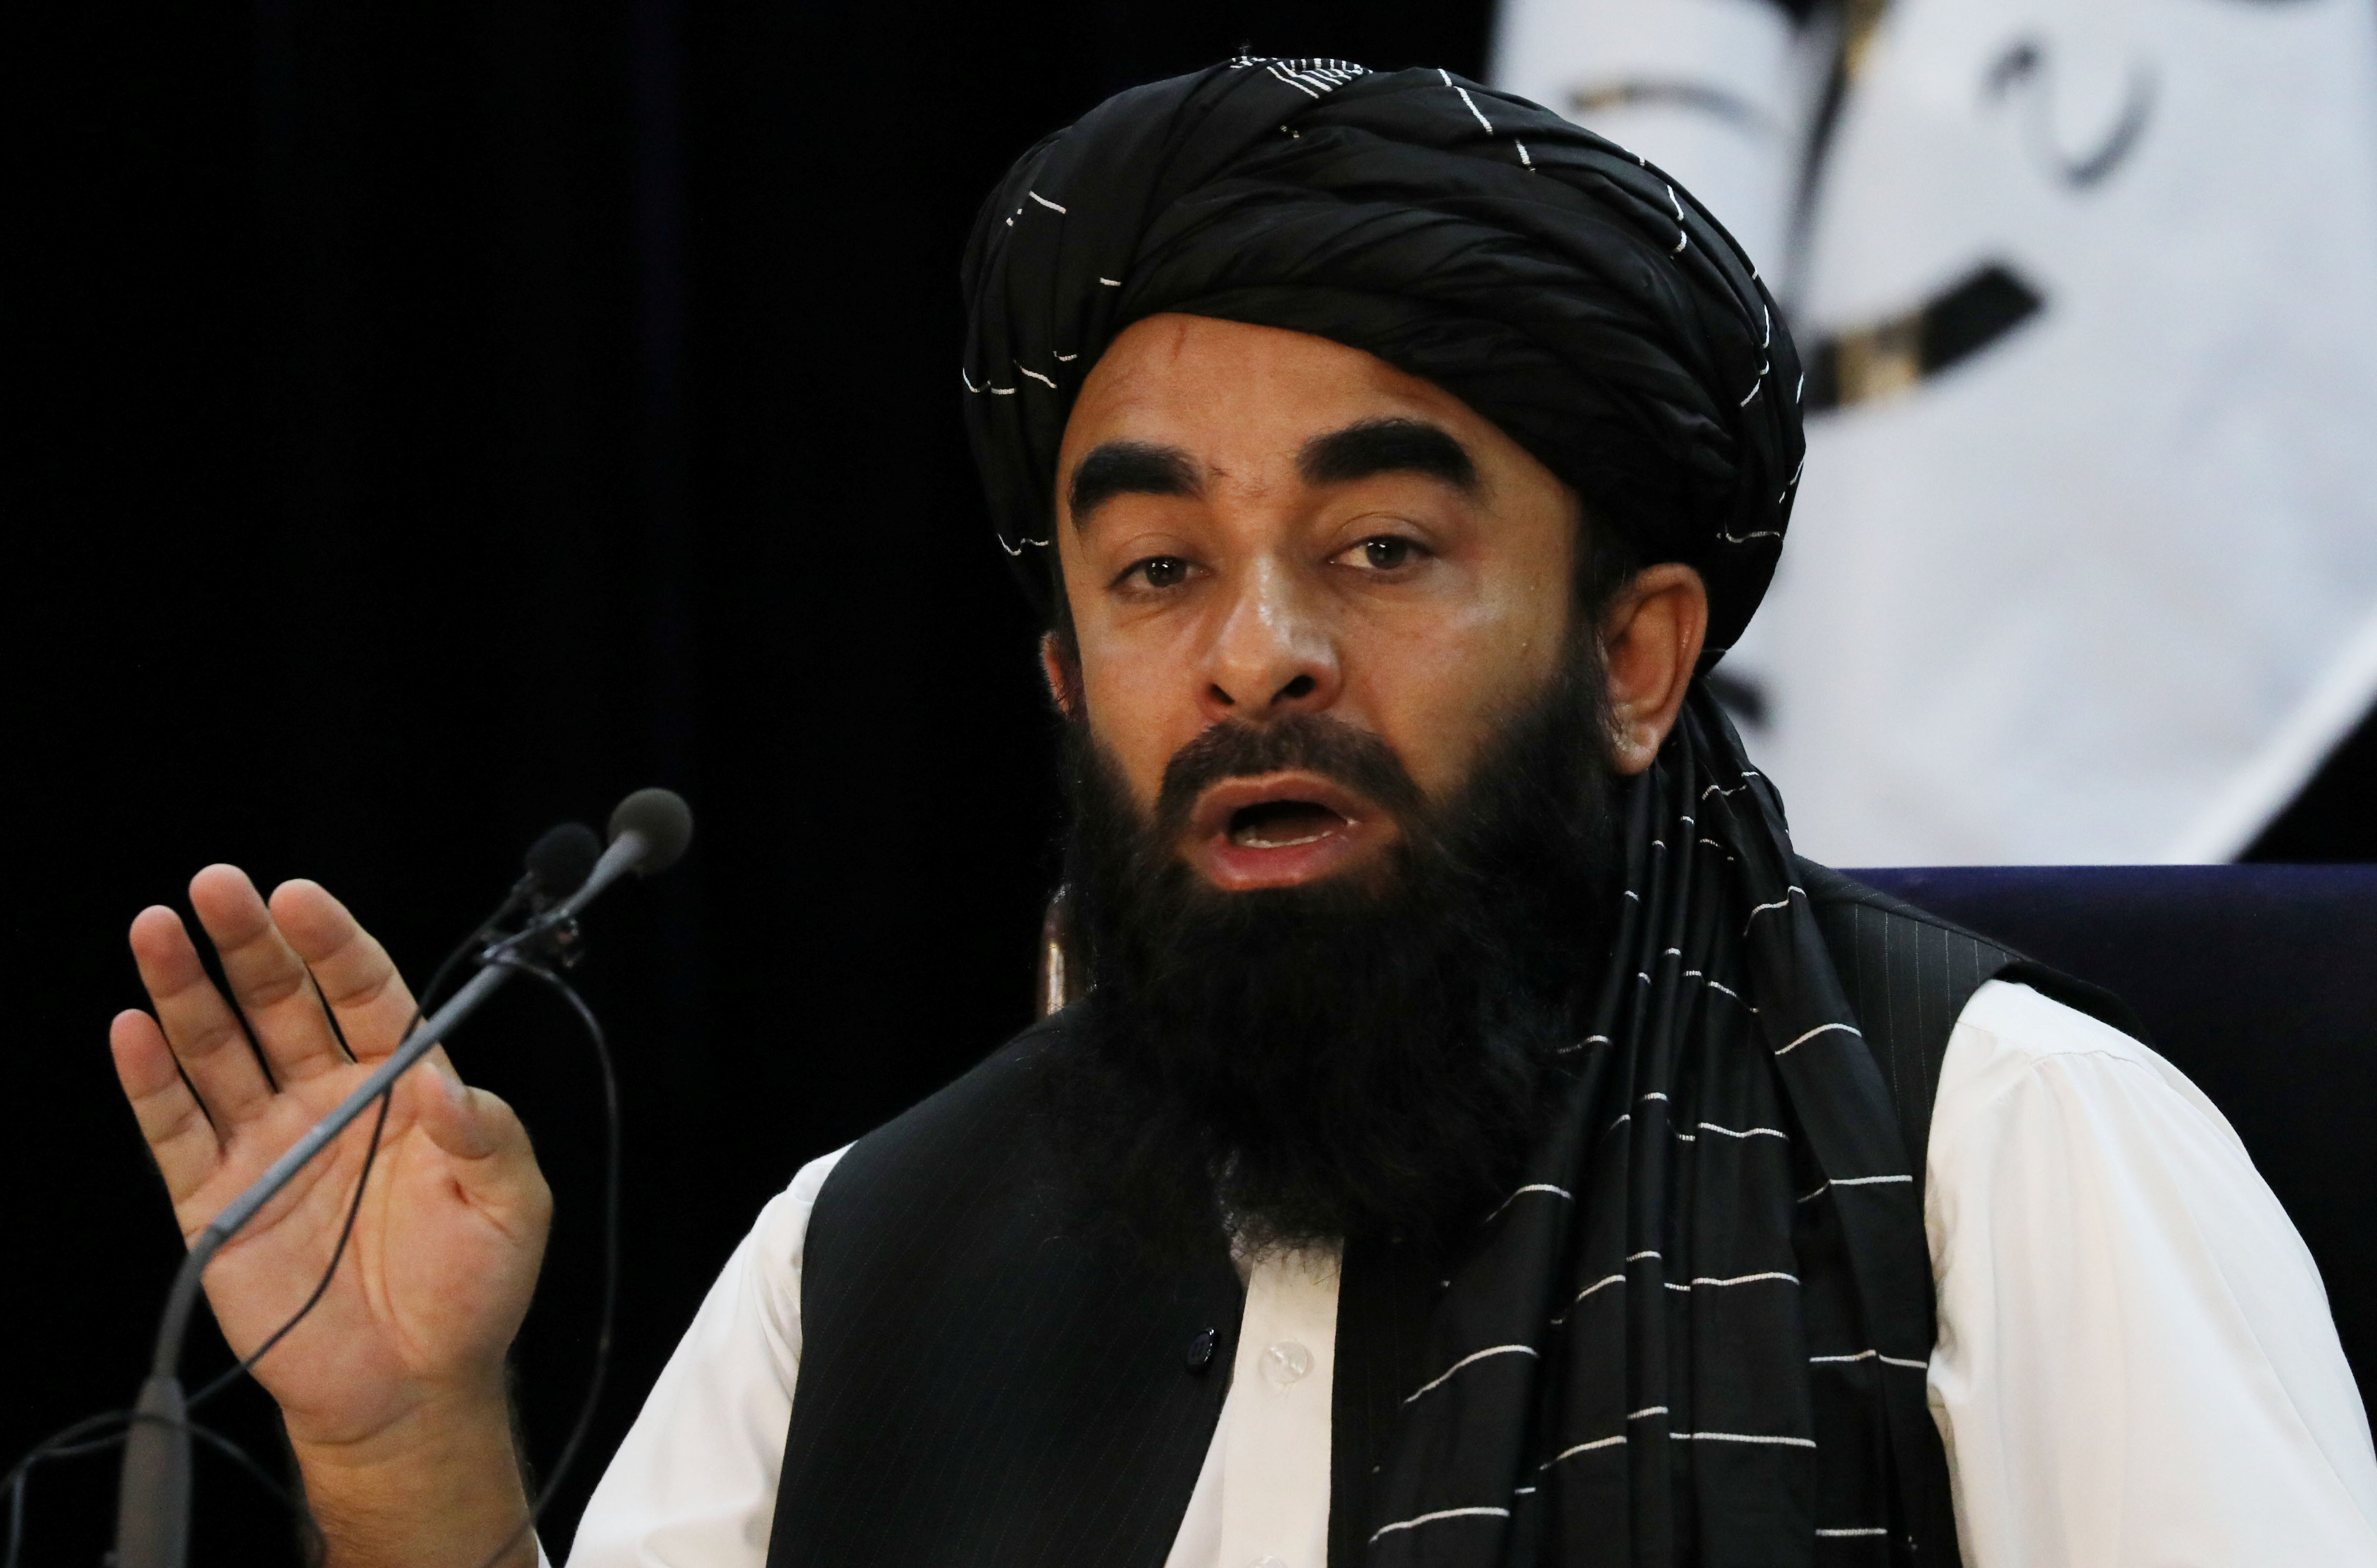 Photo of Taliban condemn 'biased' UN report, say Afghans 'living peacefully'